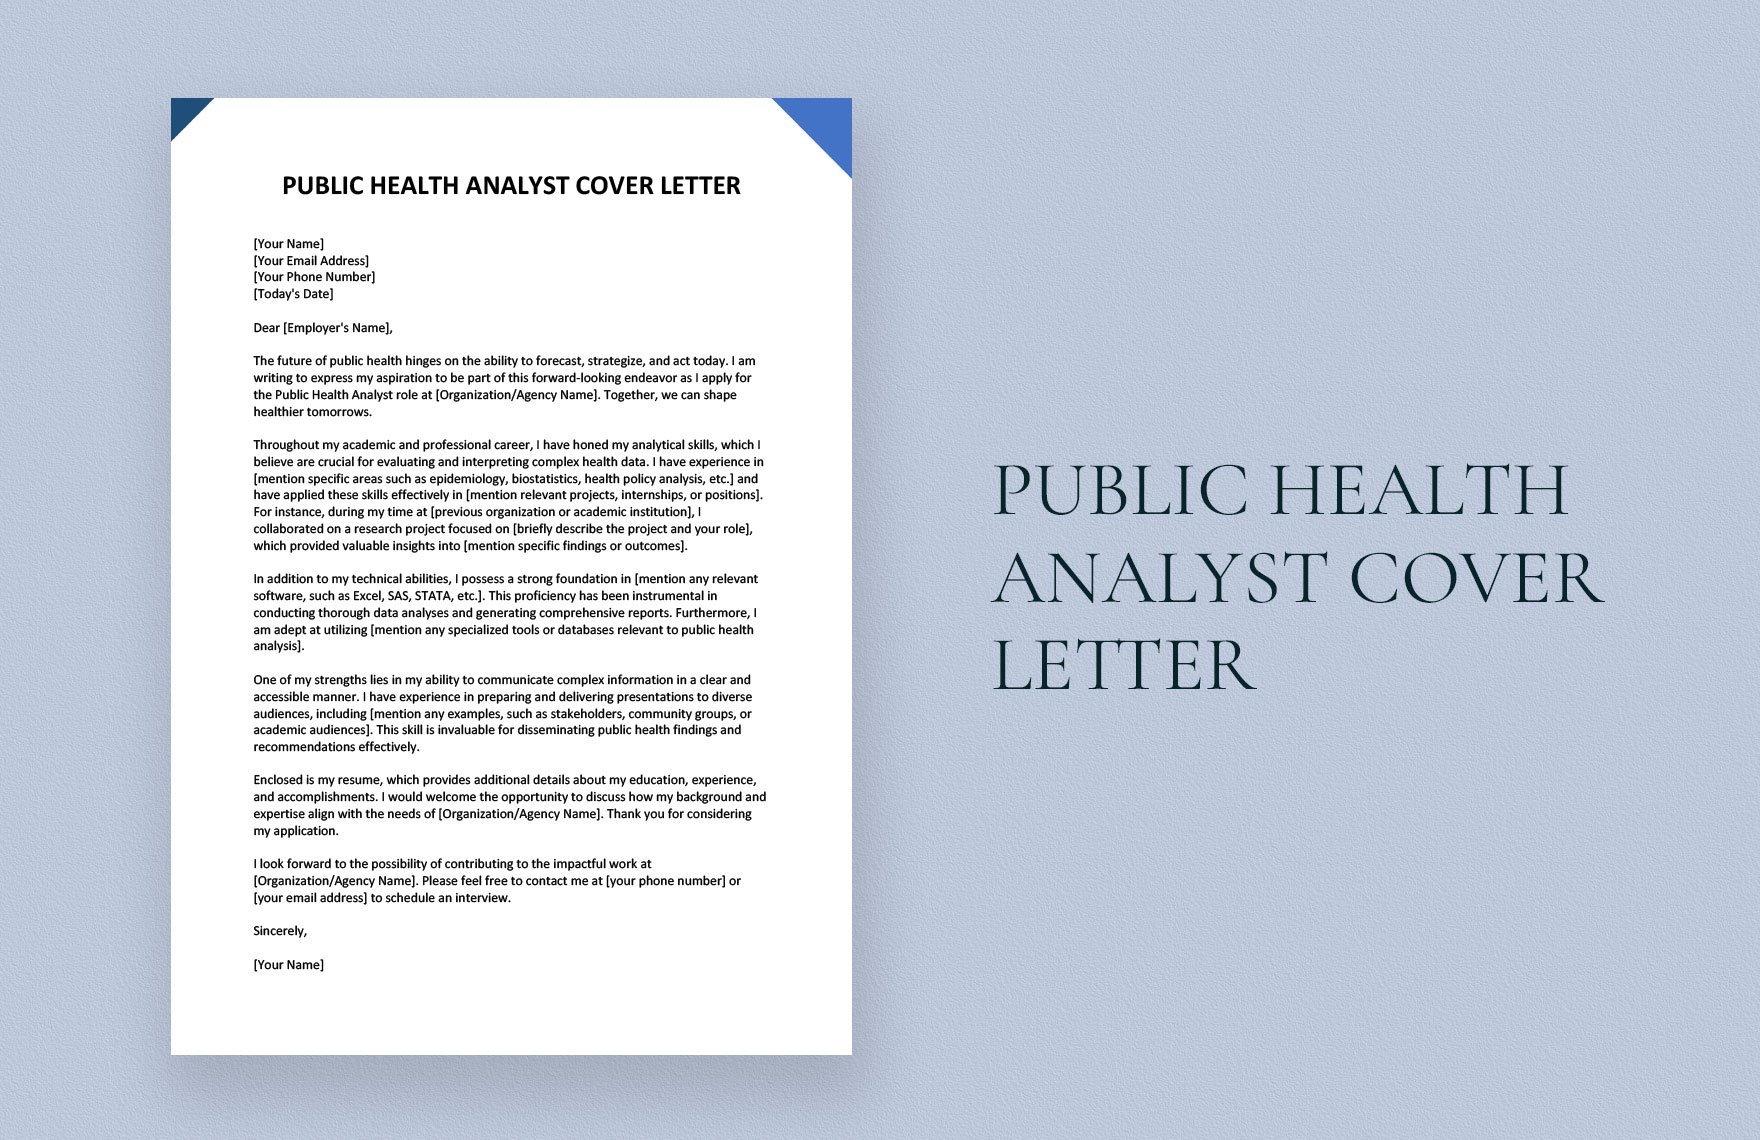 Public Health Analyst Cover Letter